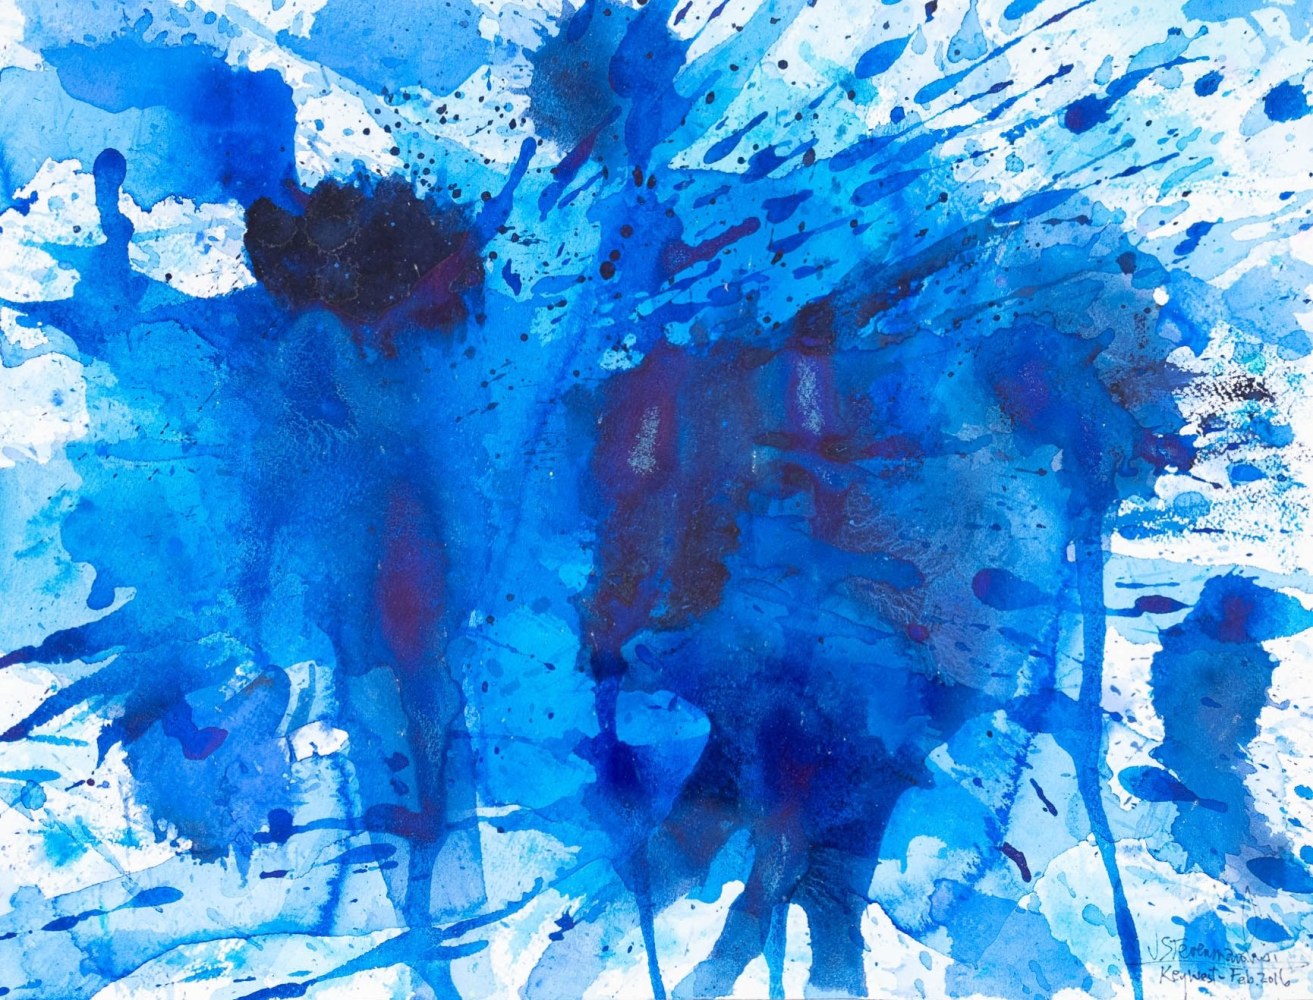 J. Steven Manolis, Splash-Key West (12.16.07), 2016, Watercolor, Acrylic and Gouache on paper, 12 x 16 inches, abstract expressionism art